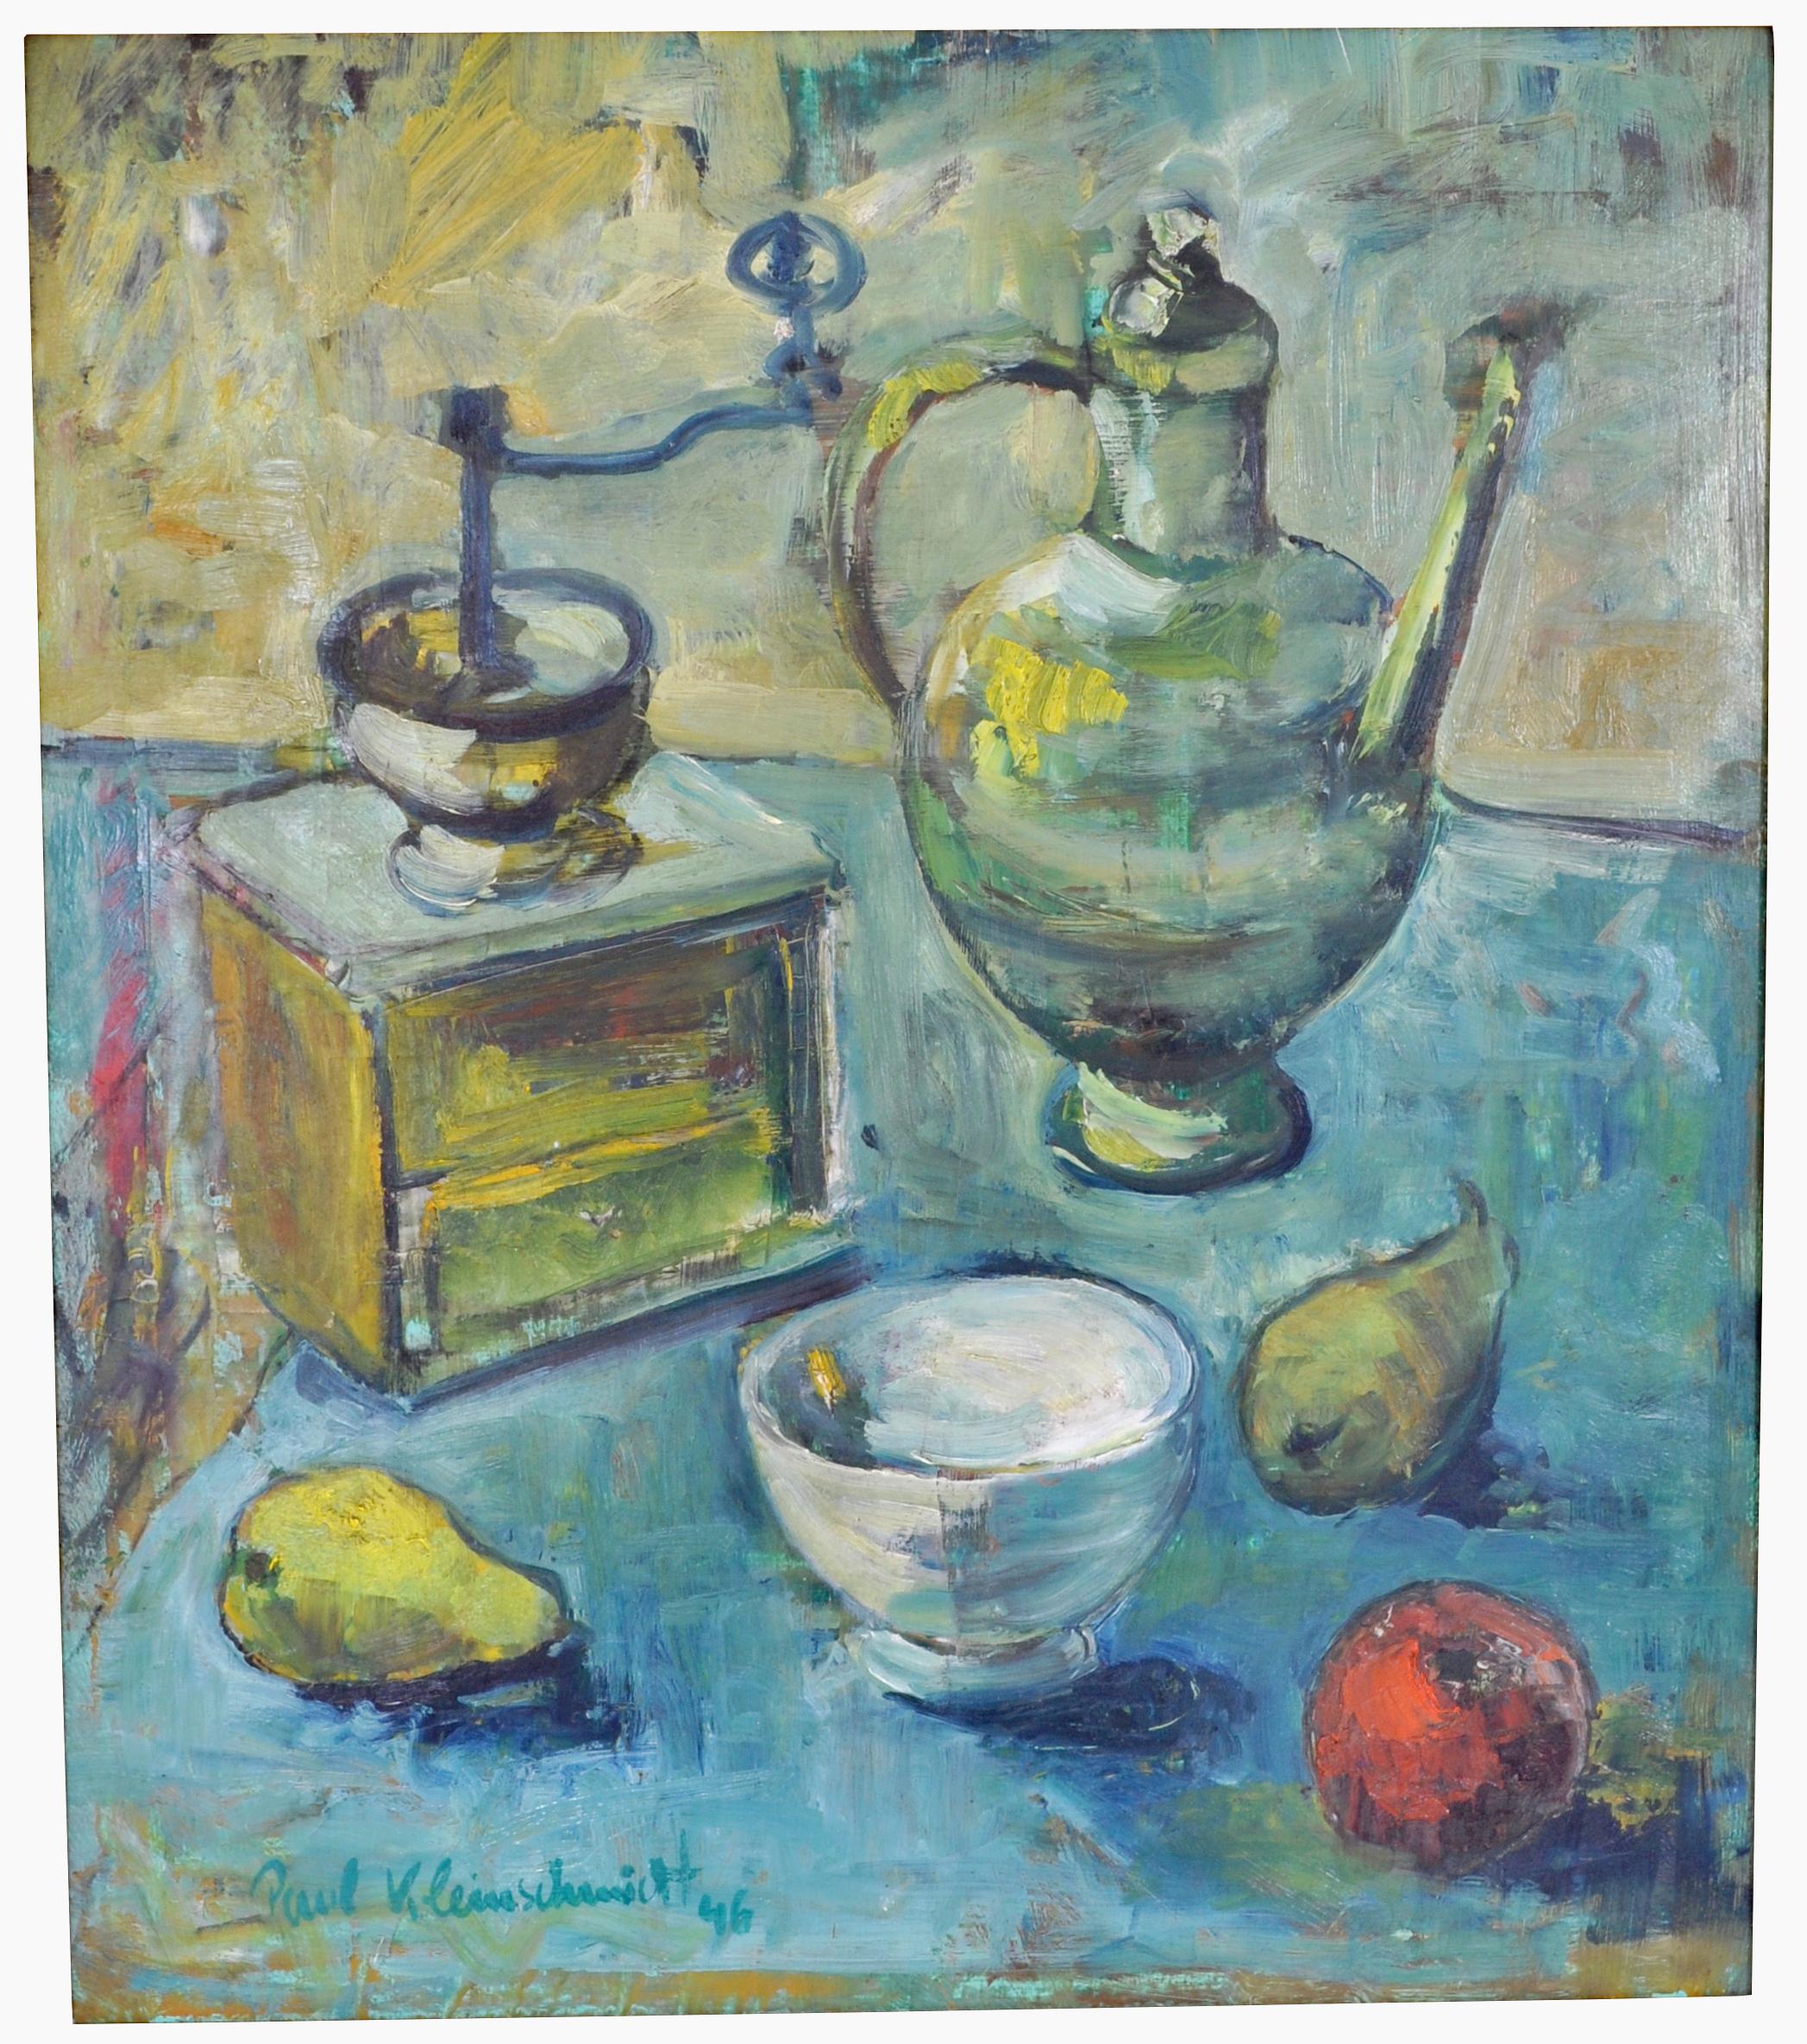 Expressionist still life oil painting by Paul Kleinschmidt (1883-1949), 1946. The painting depicting a still life scene in Kleinschmidt's typical impasto style, showing a coffee grinder and ewer with fruit and bowl to the foreground. The painting